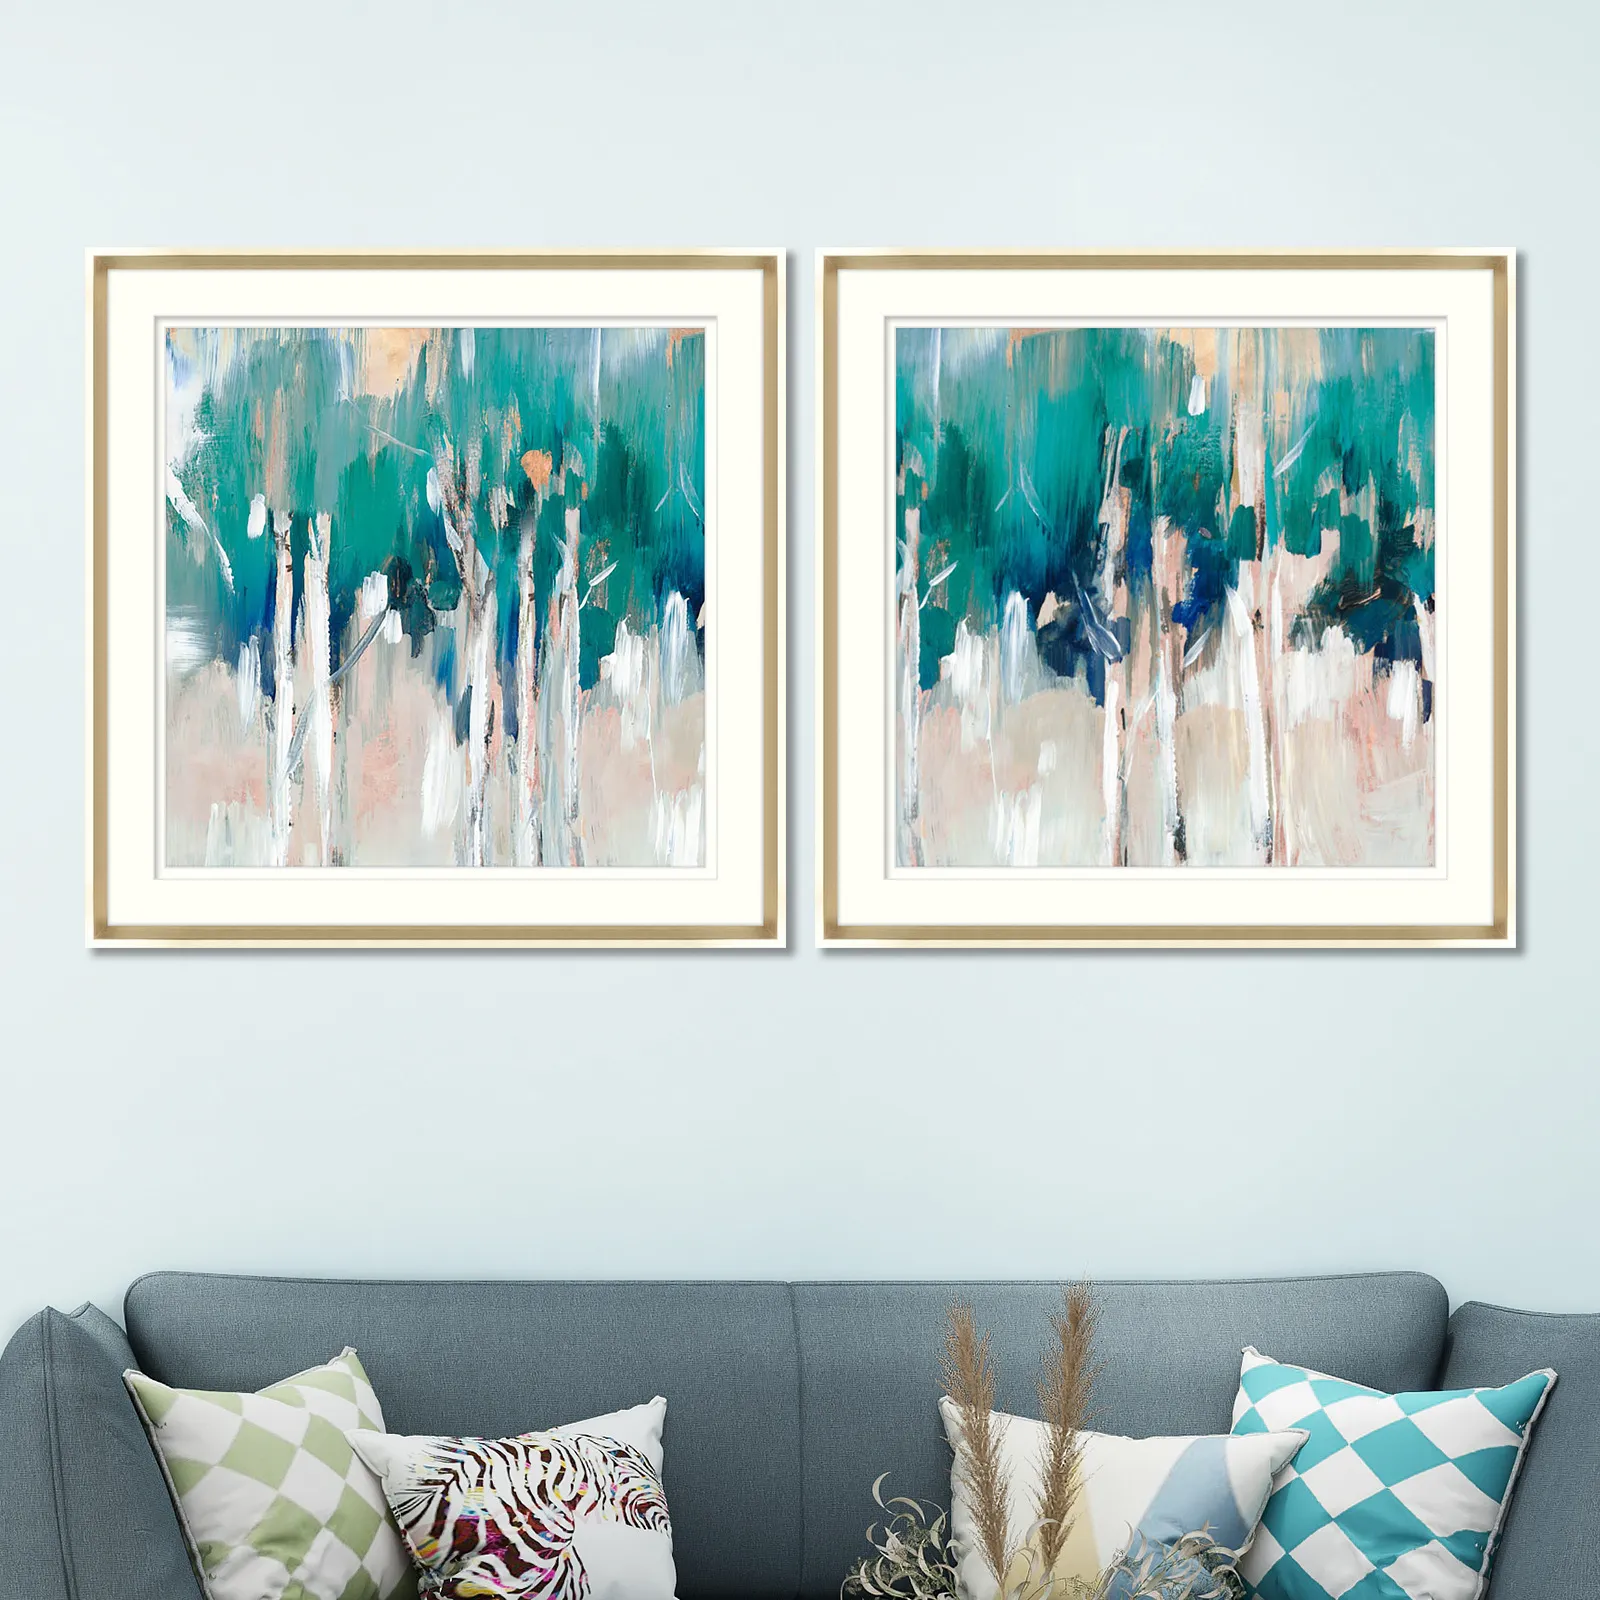 Paintings FB Abstract Tree Canvas Prints Teal Blue Oil Painting Wall Art Posters Modern Artwork For Living Room Bedroom 2 Pictures Decor 221006